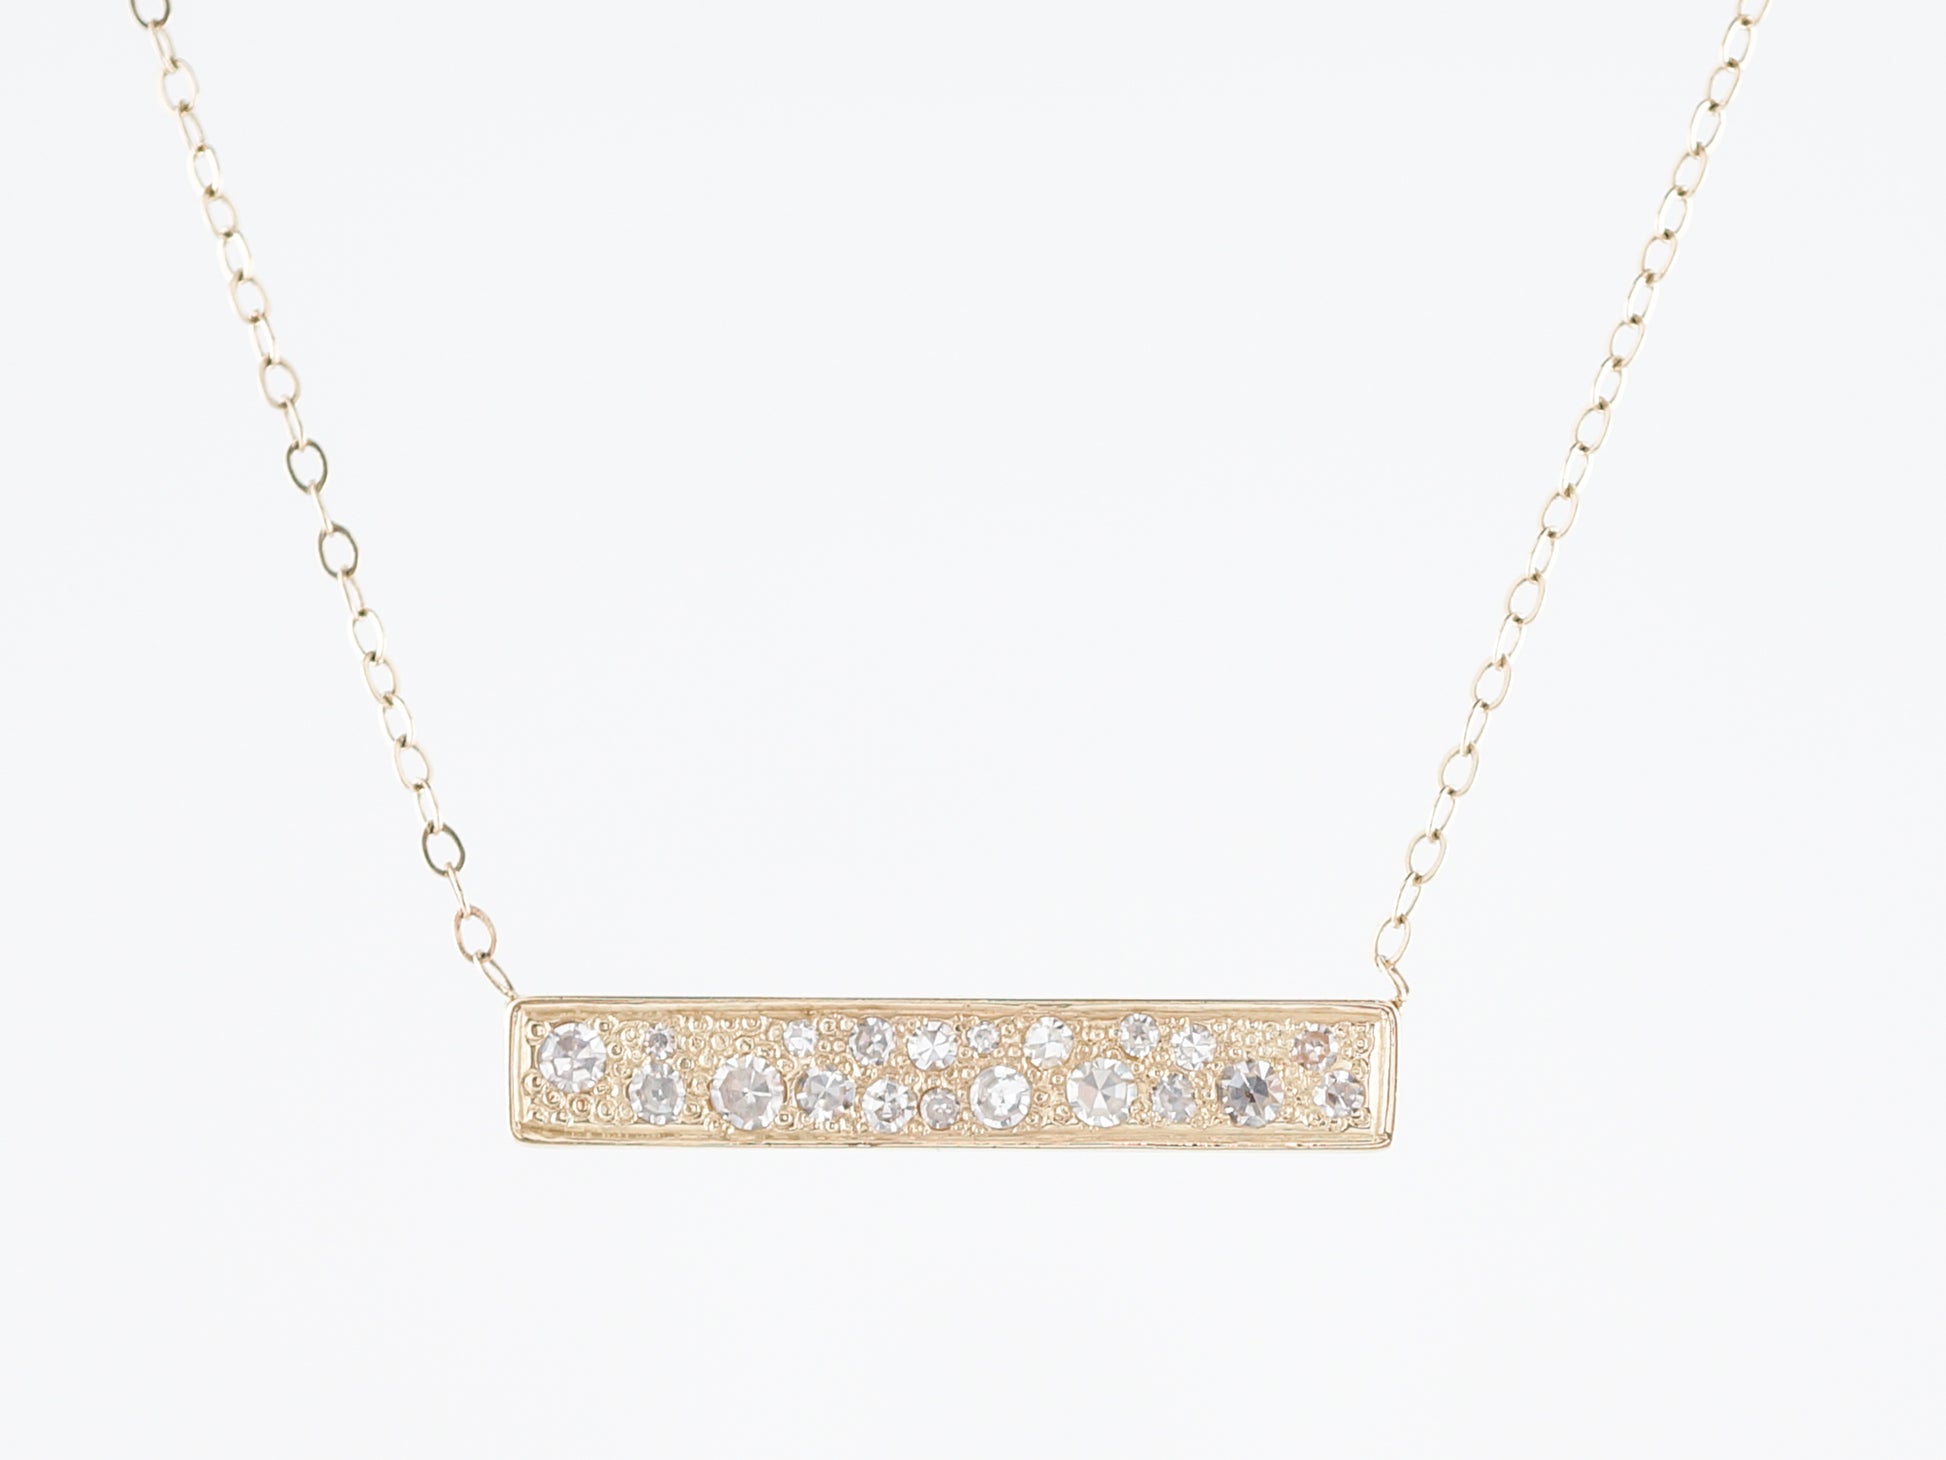 Modern Bar Necklace .80 Single Cut Diamonds in 14k Yellow GoldComposition: Platinum Total Diamond Weight: .80ct Total Gram Weight: 2.70 g